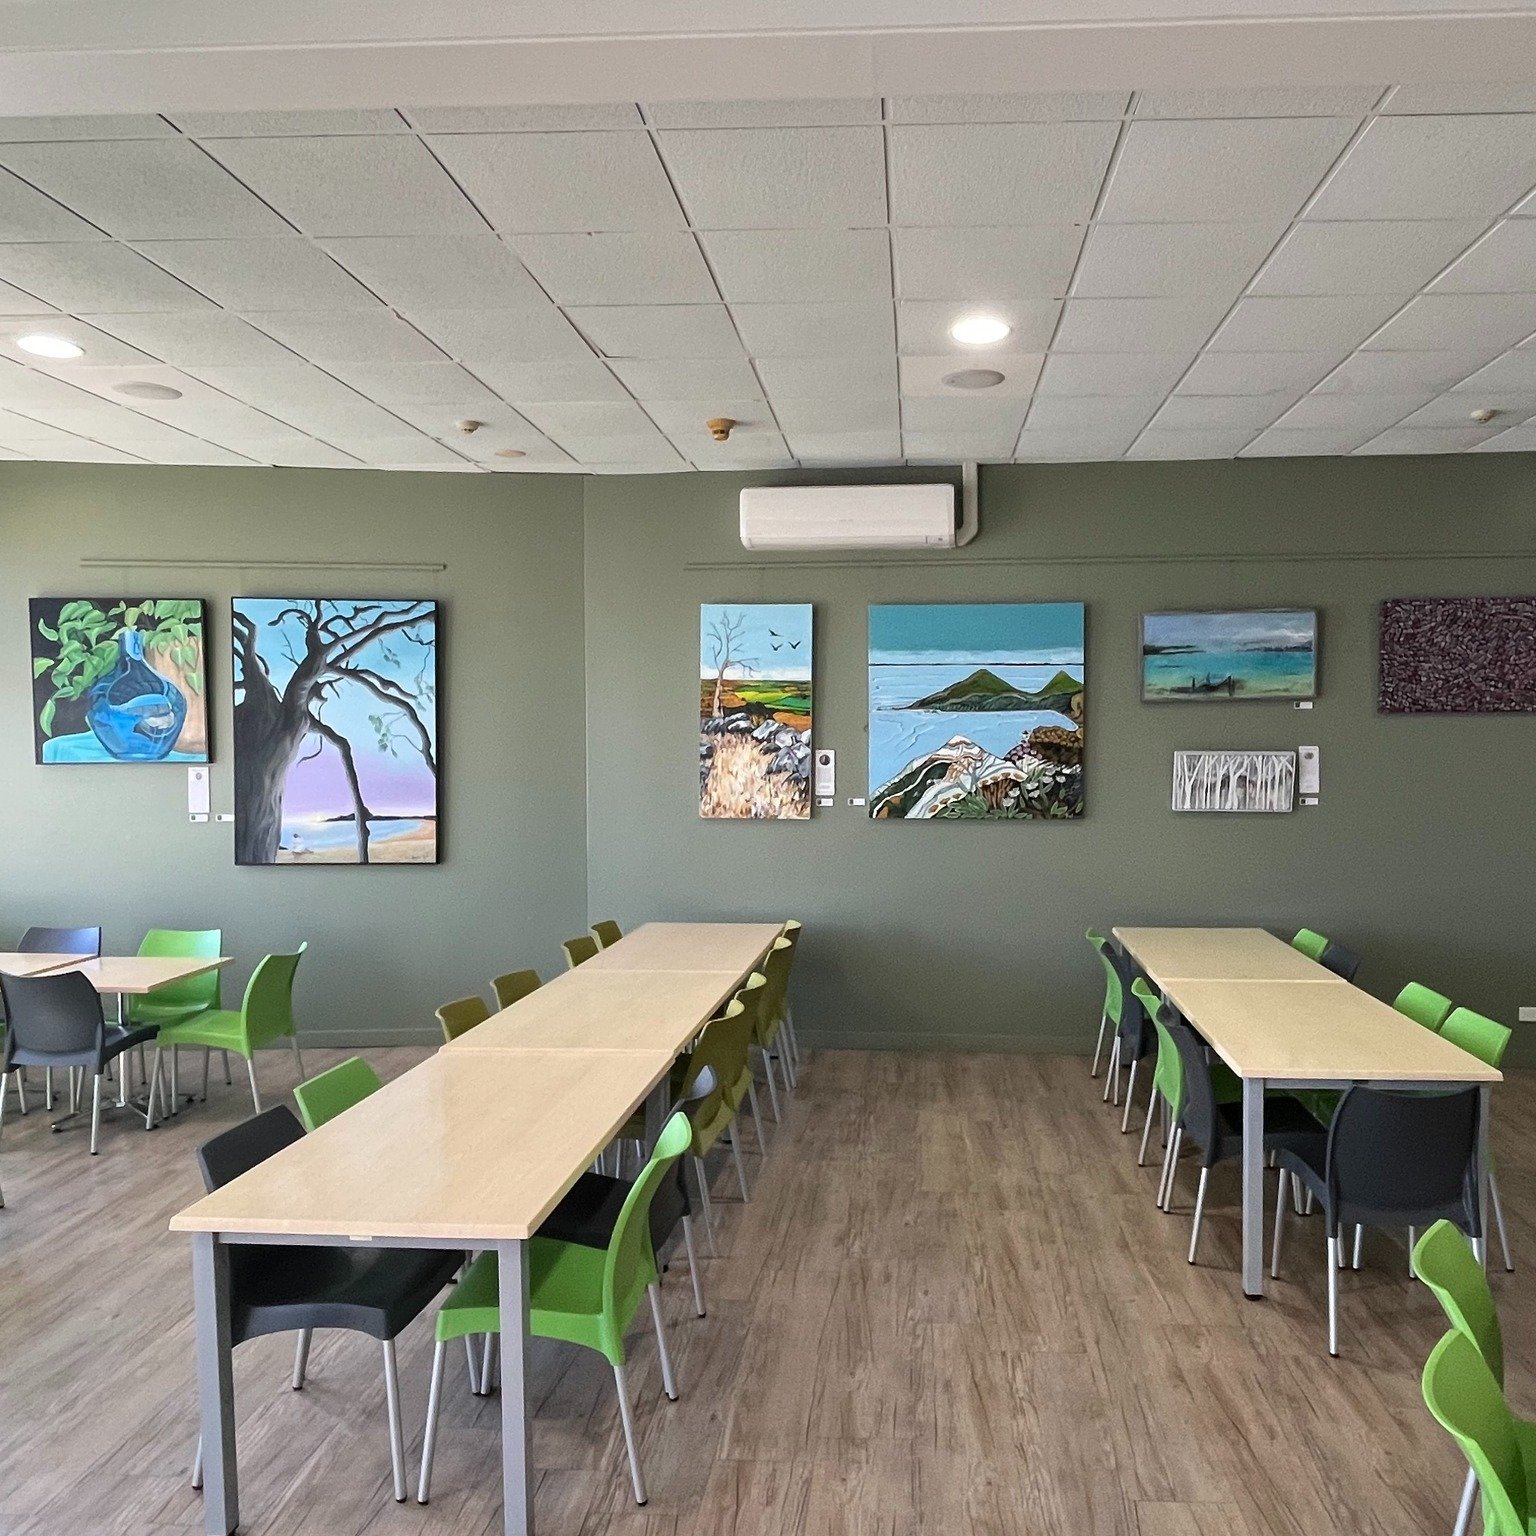 The latest Lakeview Gallery exhibition presented by @pacificpalmsartsinc is now adding a splash of colour to the walls of the Sunset Bistro and cafe 🖼️ The current exhibition which runs until mid June features the works of local artists Eleanor Anso